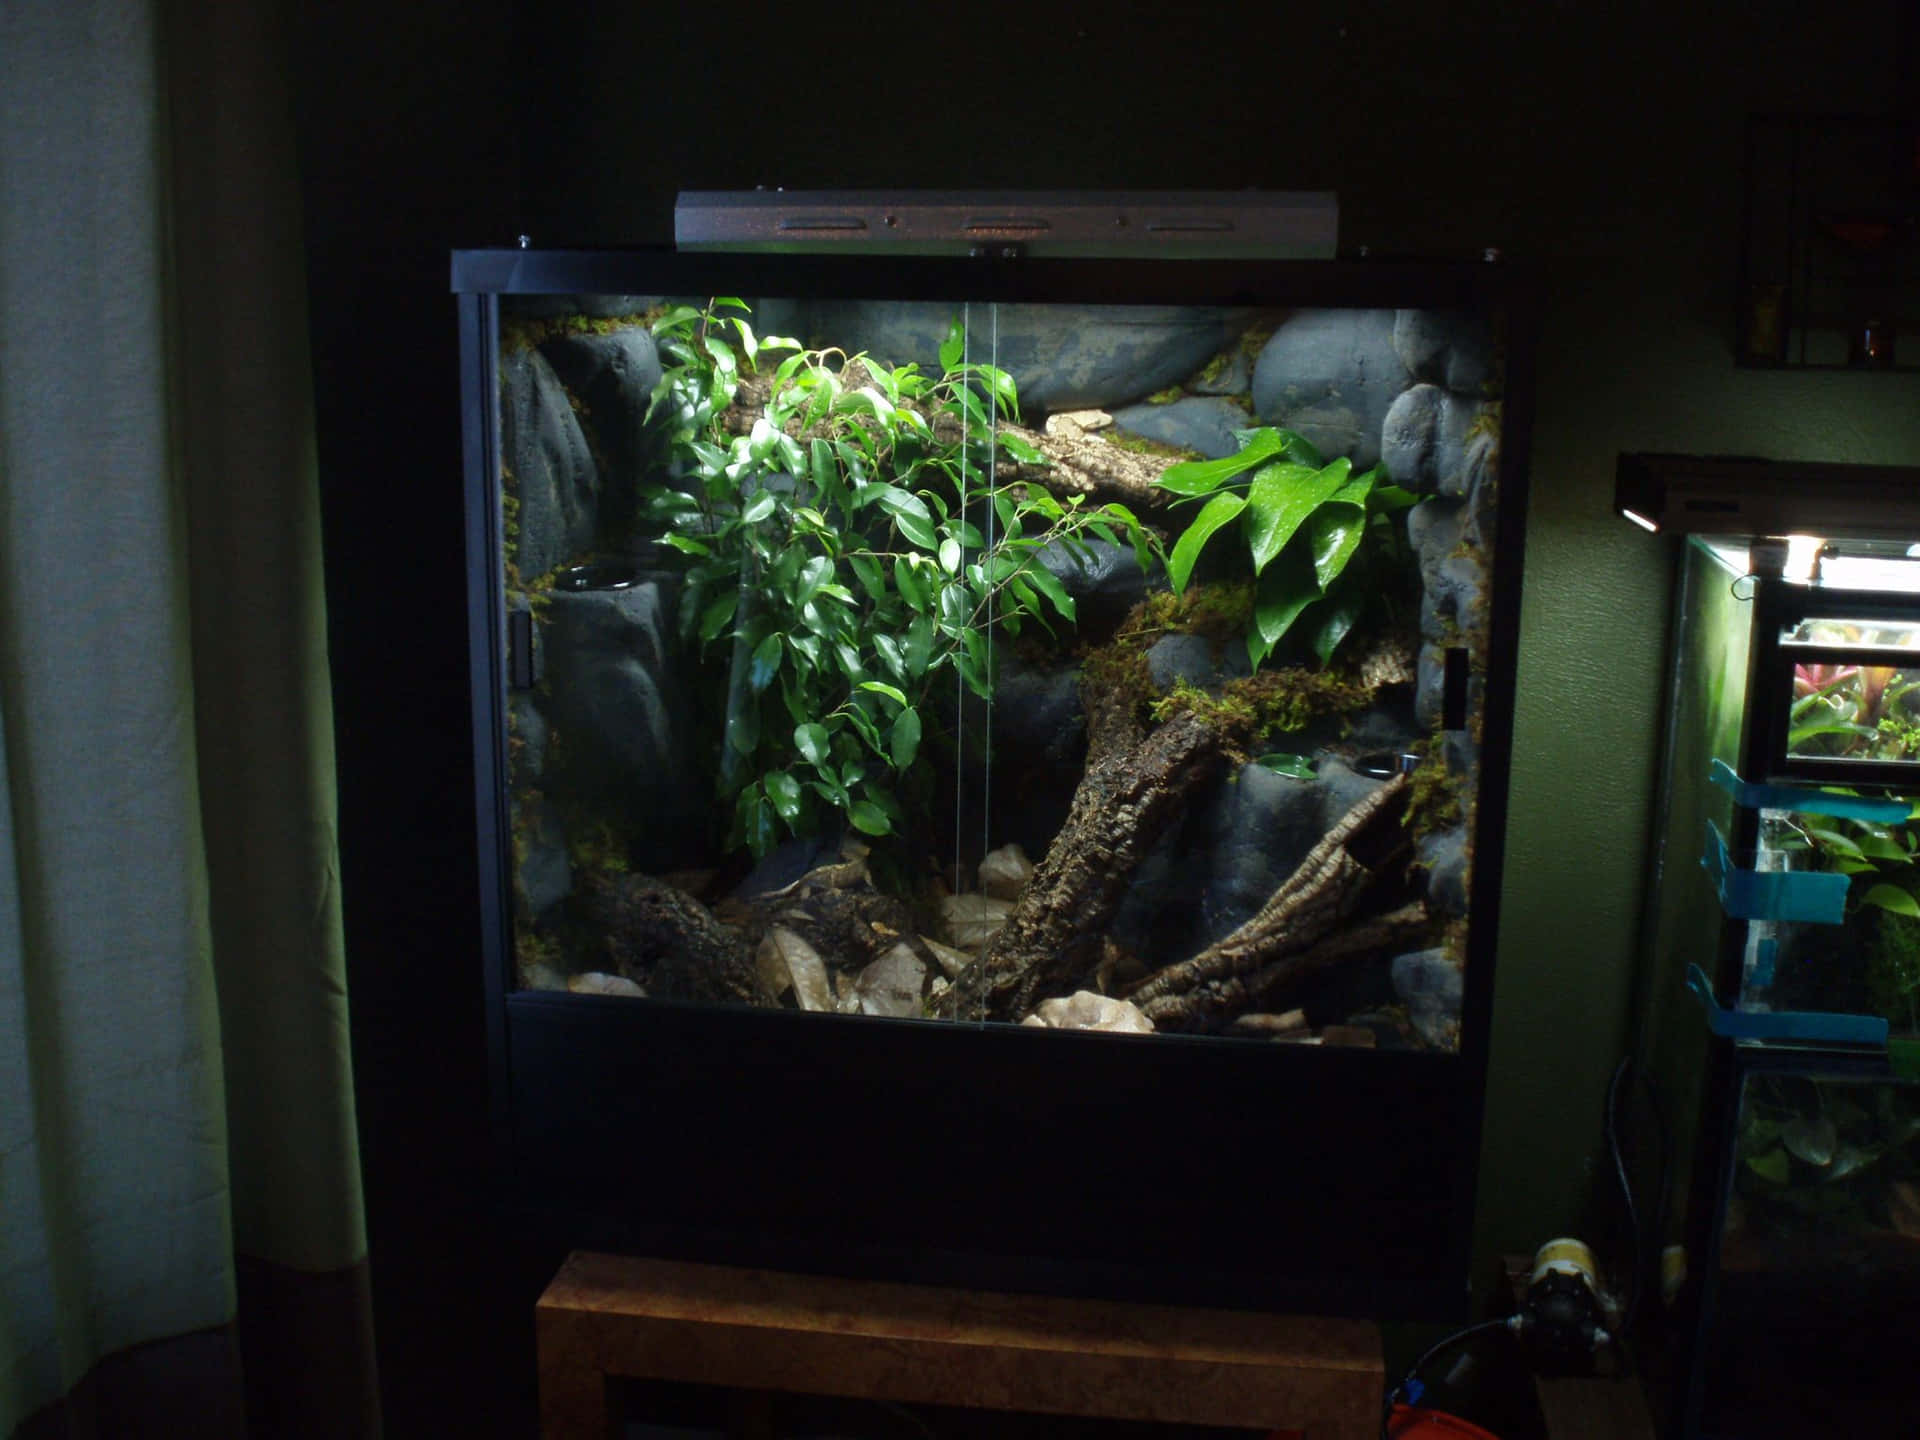 A Small Terrarium With Plants And A Lizard